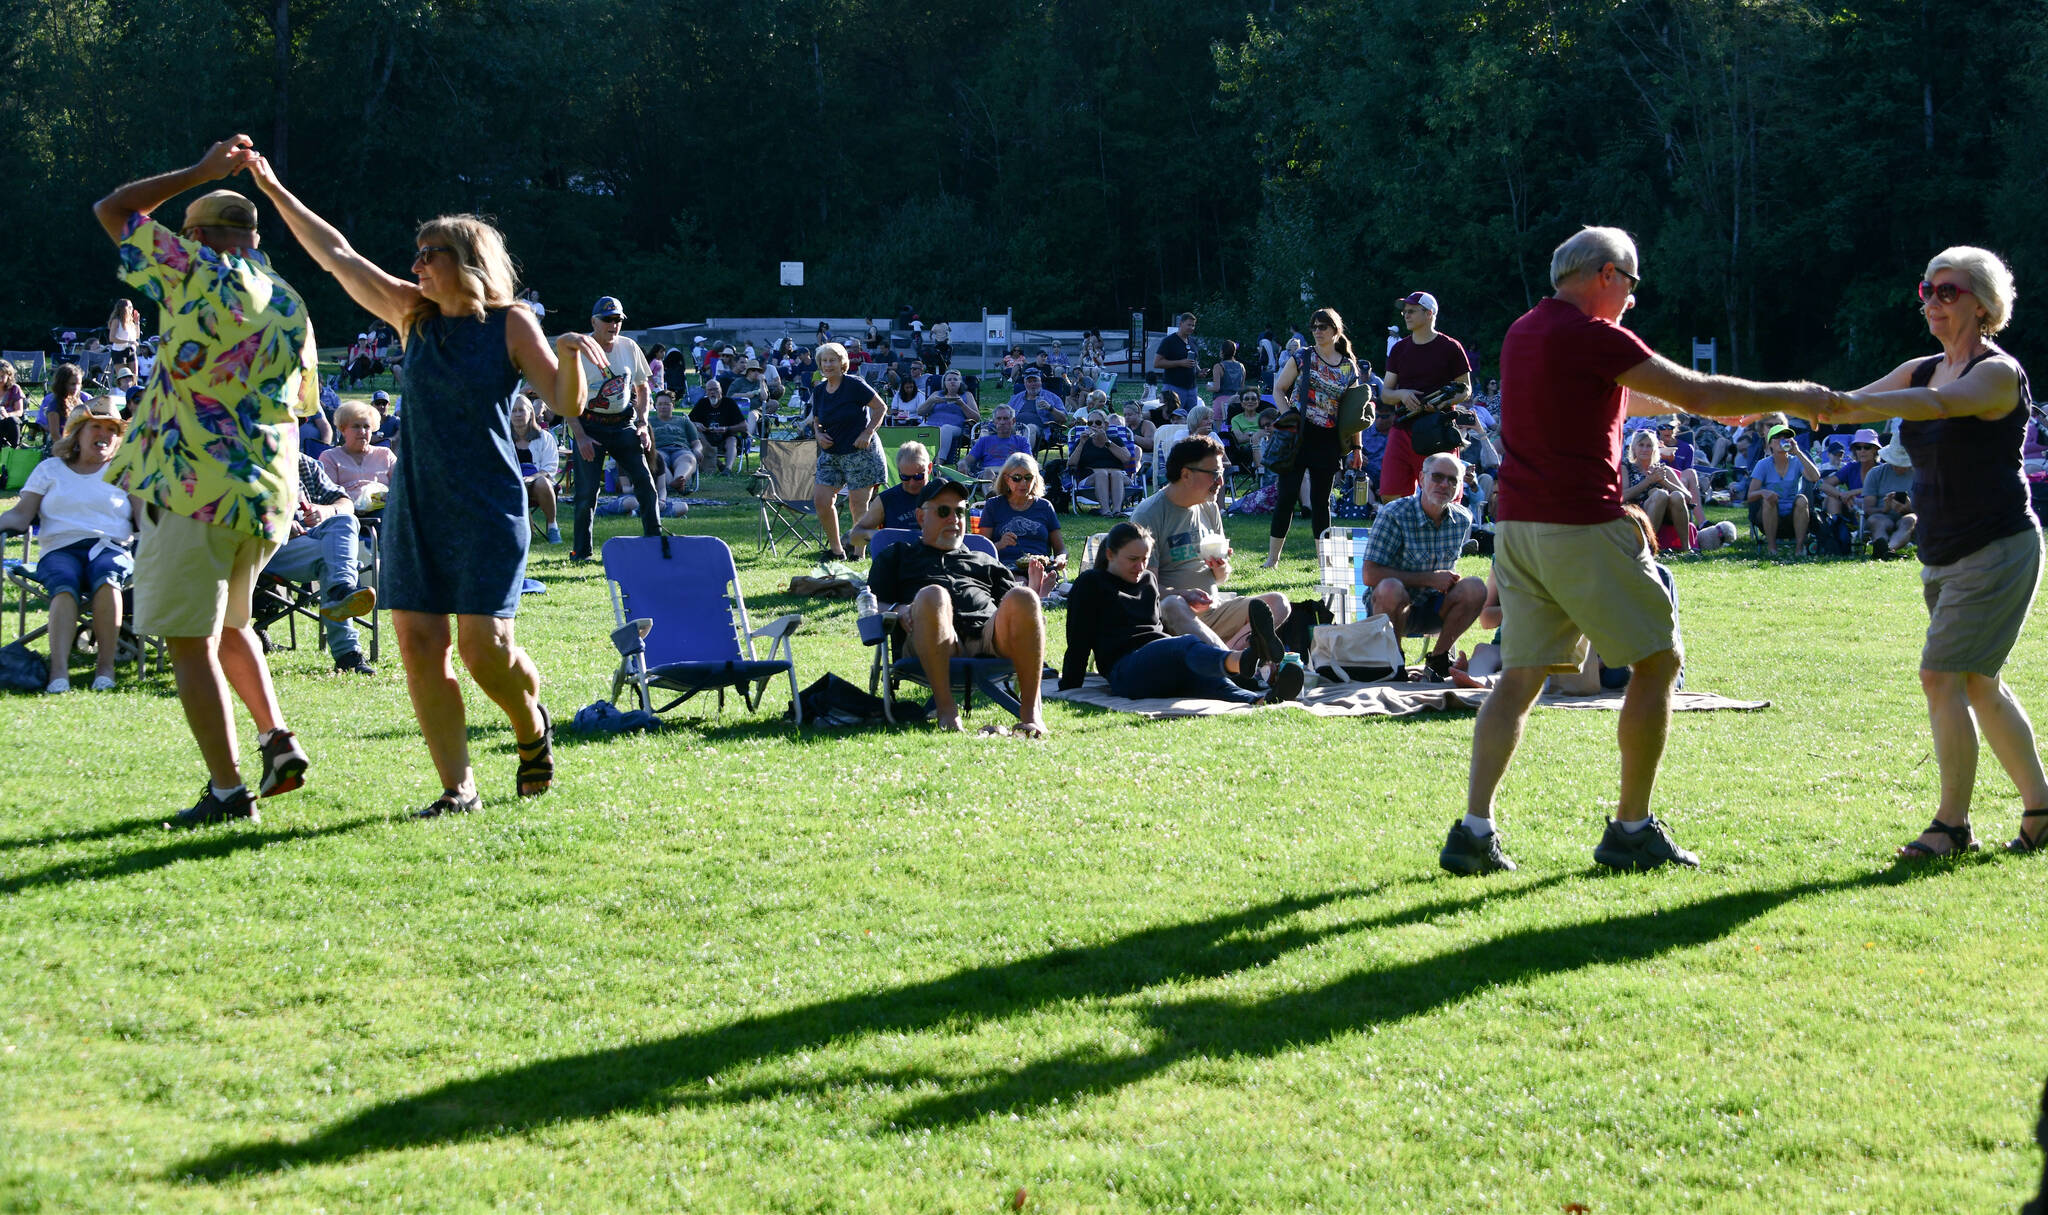 Concert-goers dance to Wally and The Beaves. Andy Nystrom/ staff photo